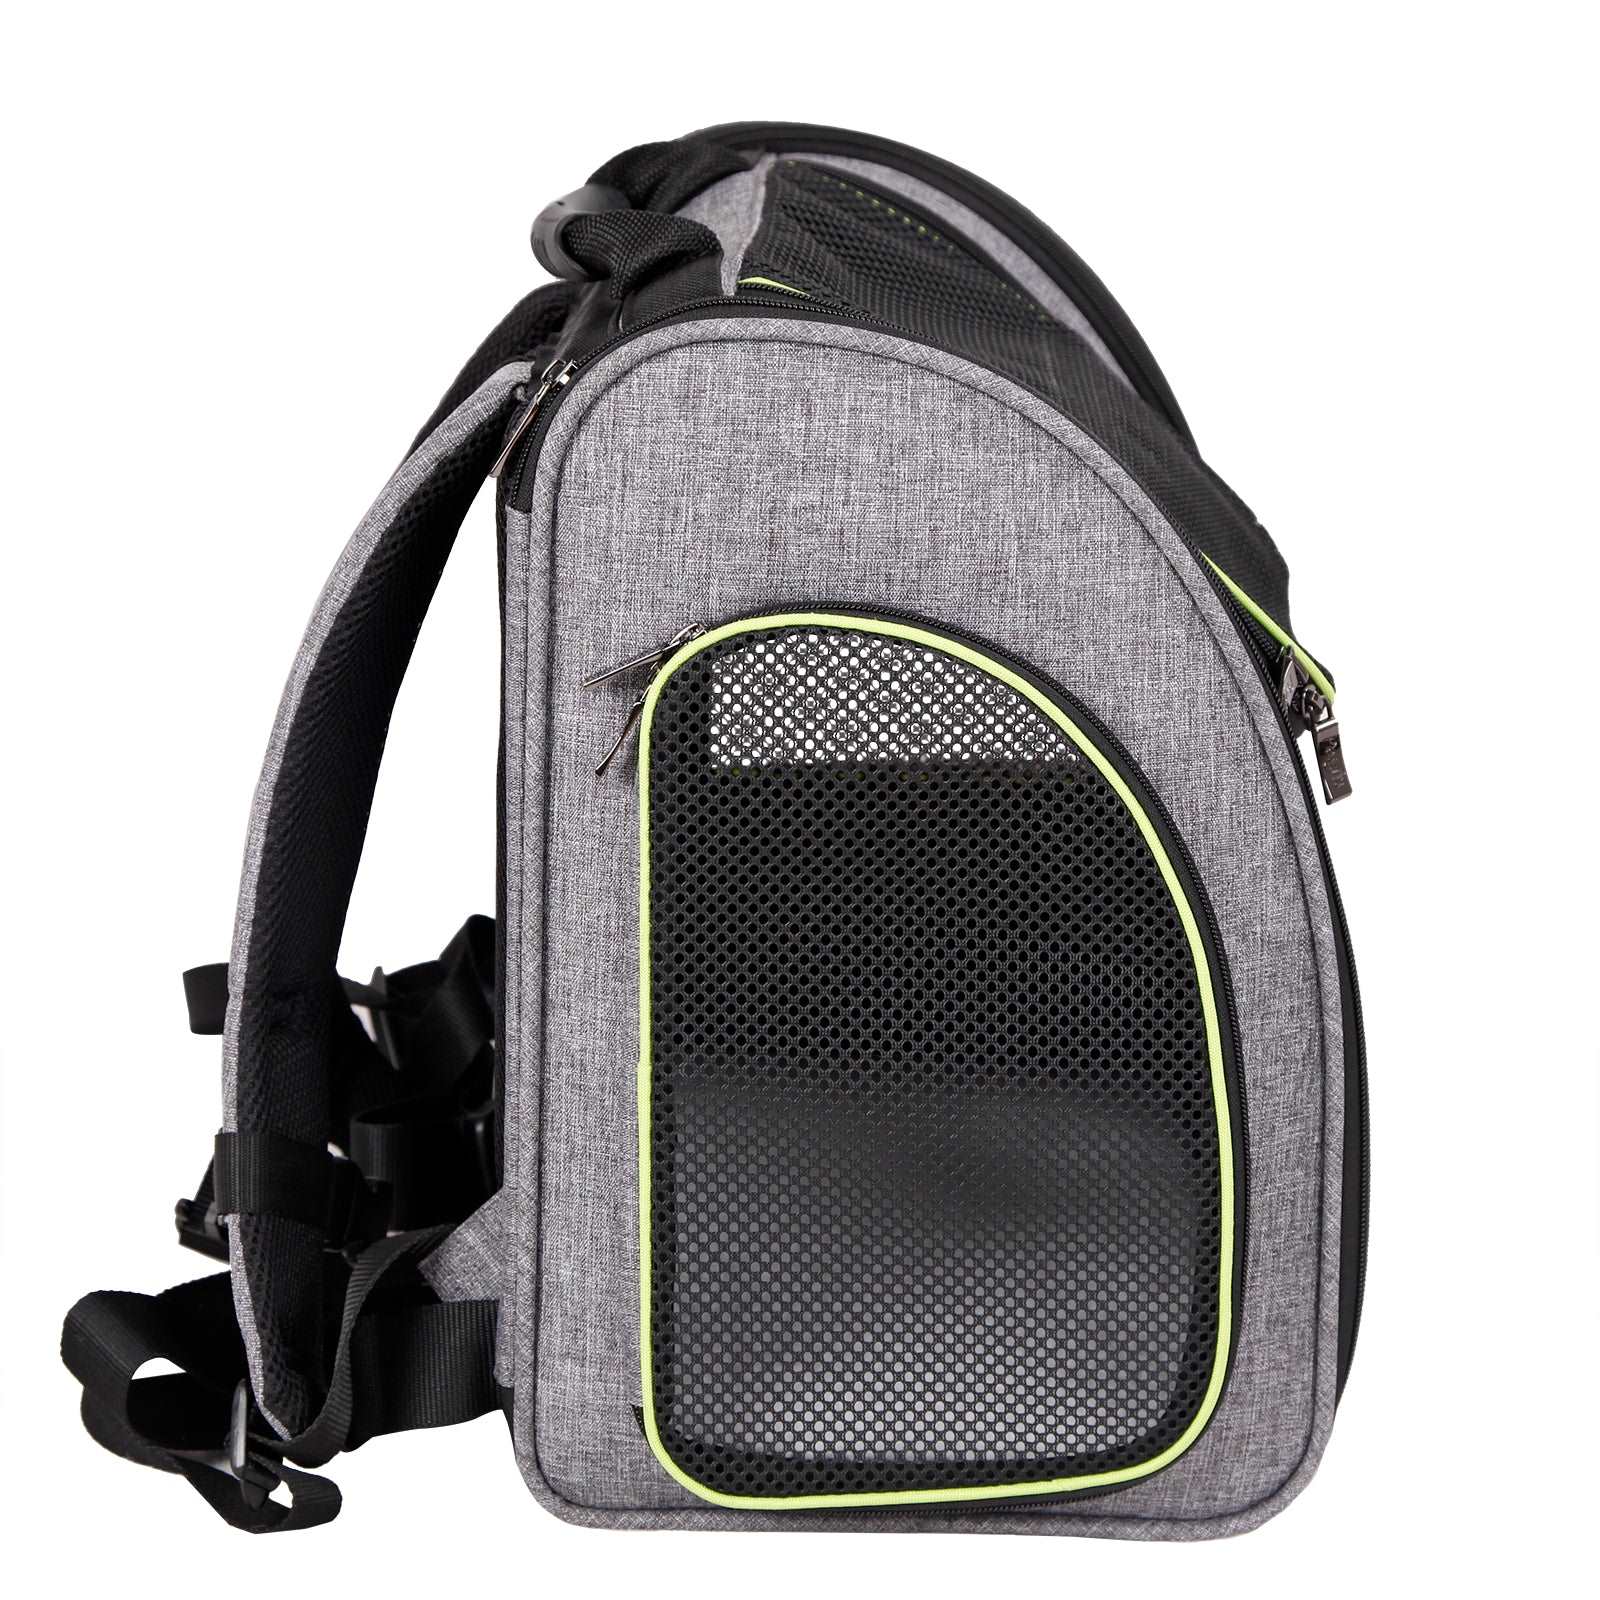 Petsfit-Cat-and-Dog-Backpack-Carrier-Soft-Side-with-Good-Ventilation-05